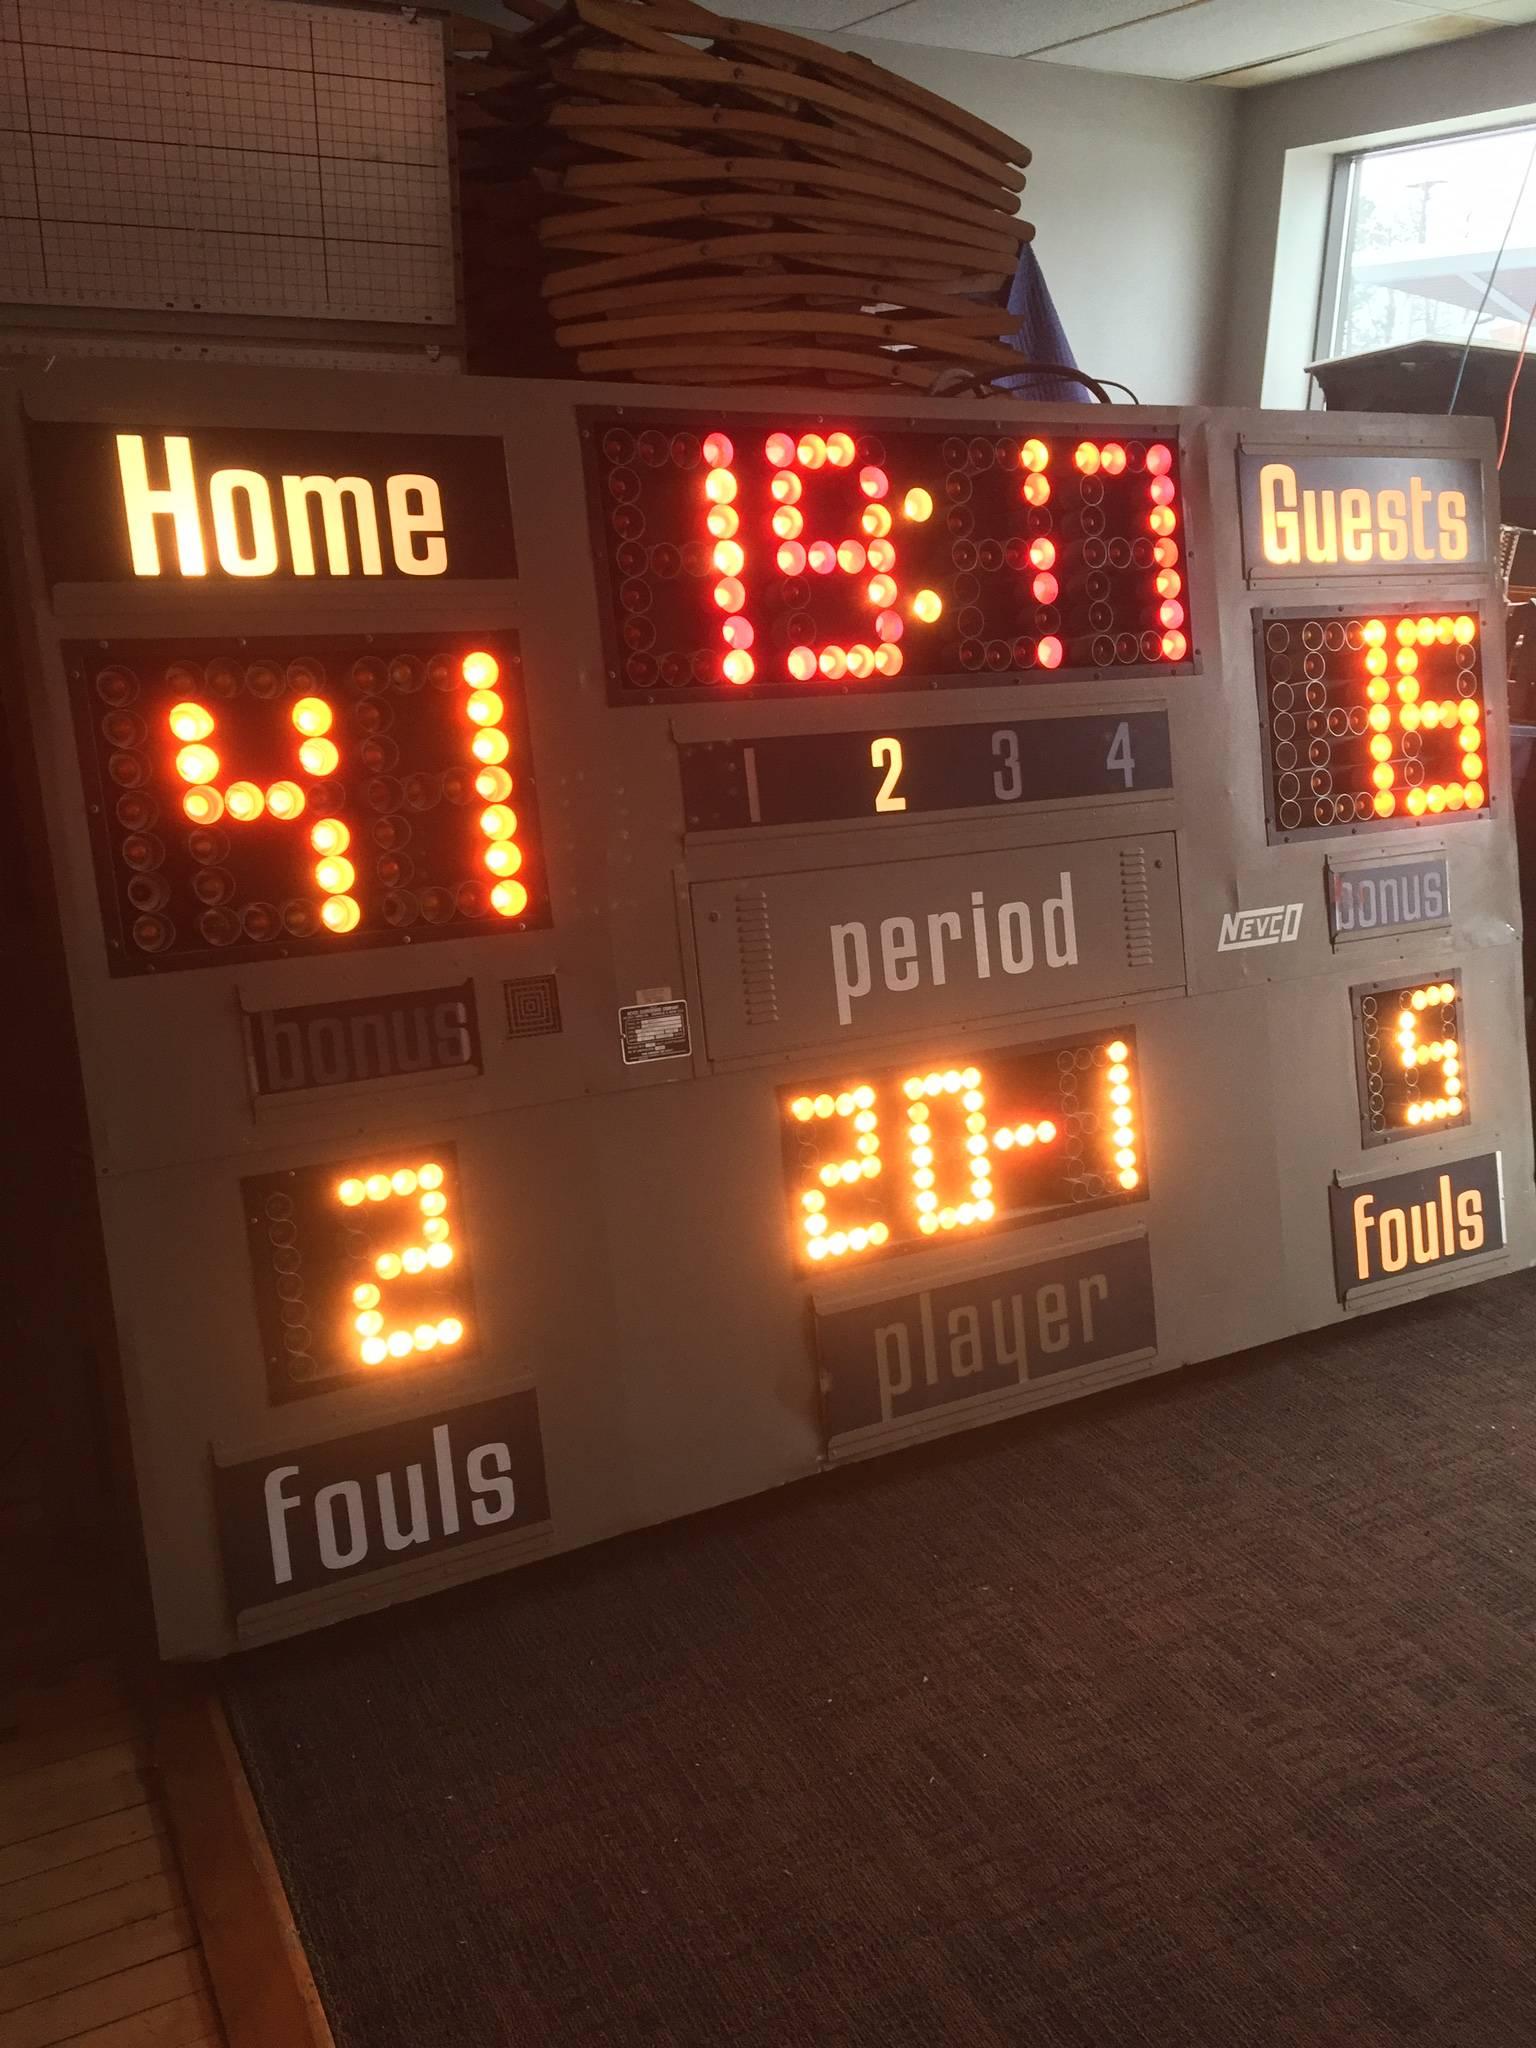 Scoreboard for high school basketball from the midwest, circa 1990s. Excellent working condition with control panel. Lights, action, foul. And a great, working Horn! Not much beats the excitement level of high school basketball. Listing is for one